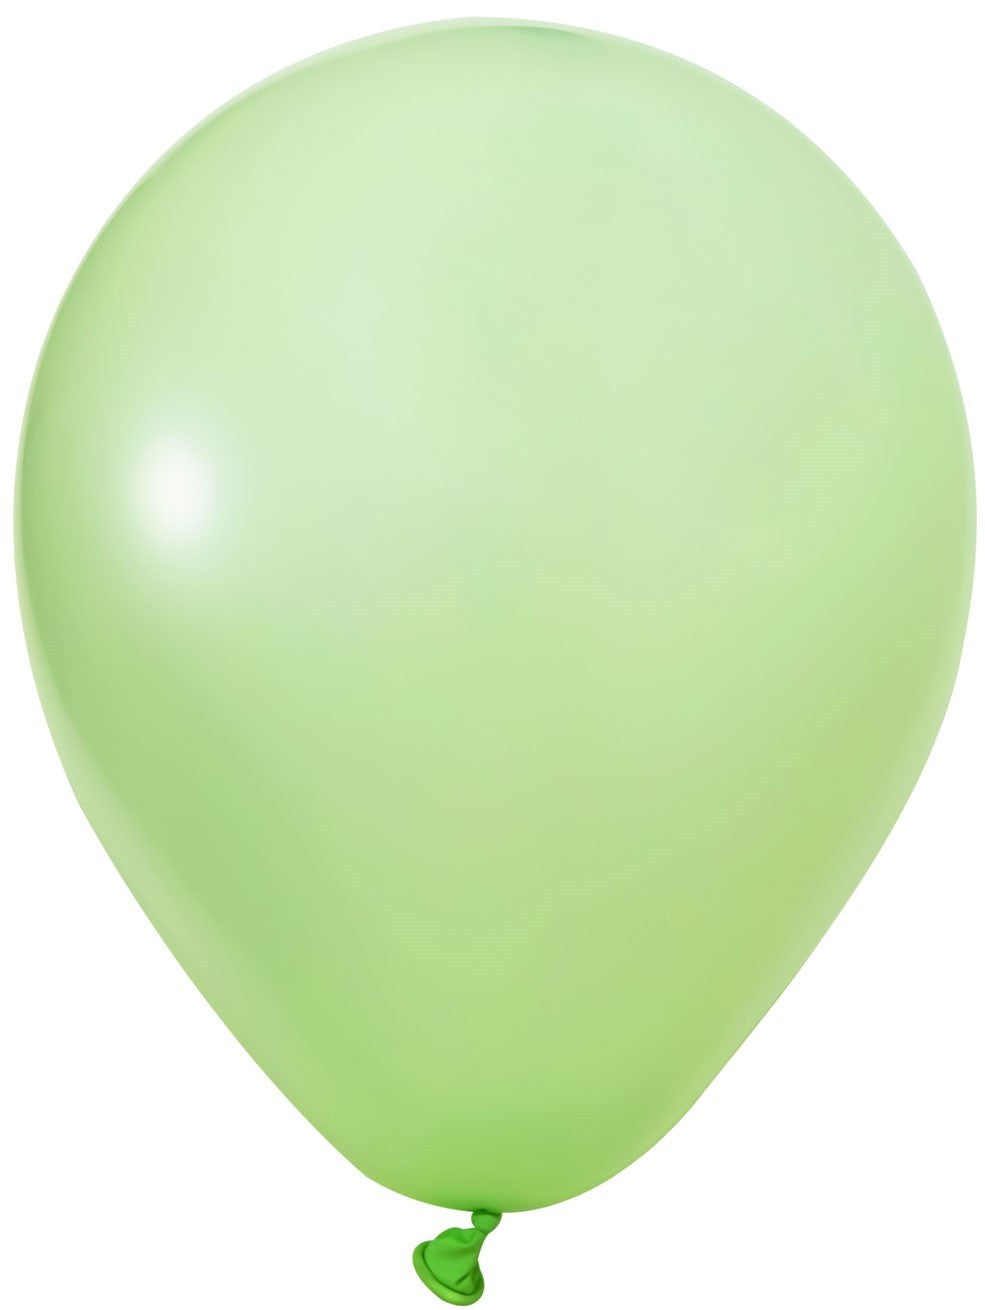 View Macaron Green Latex Balloon 12inch Pack of 100 information